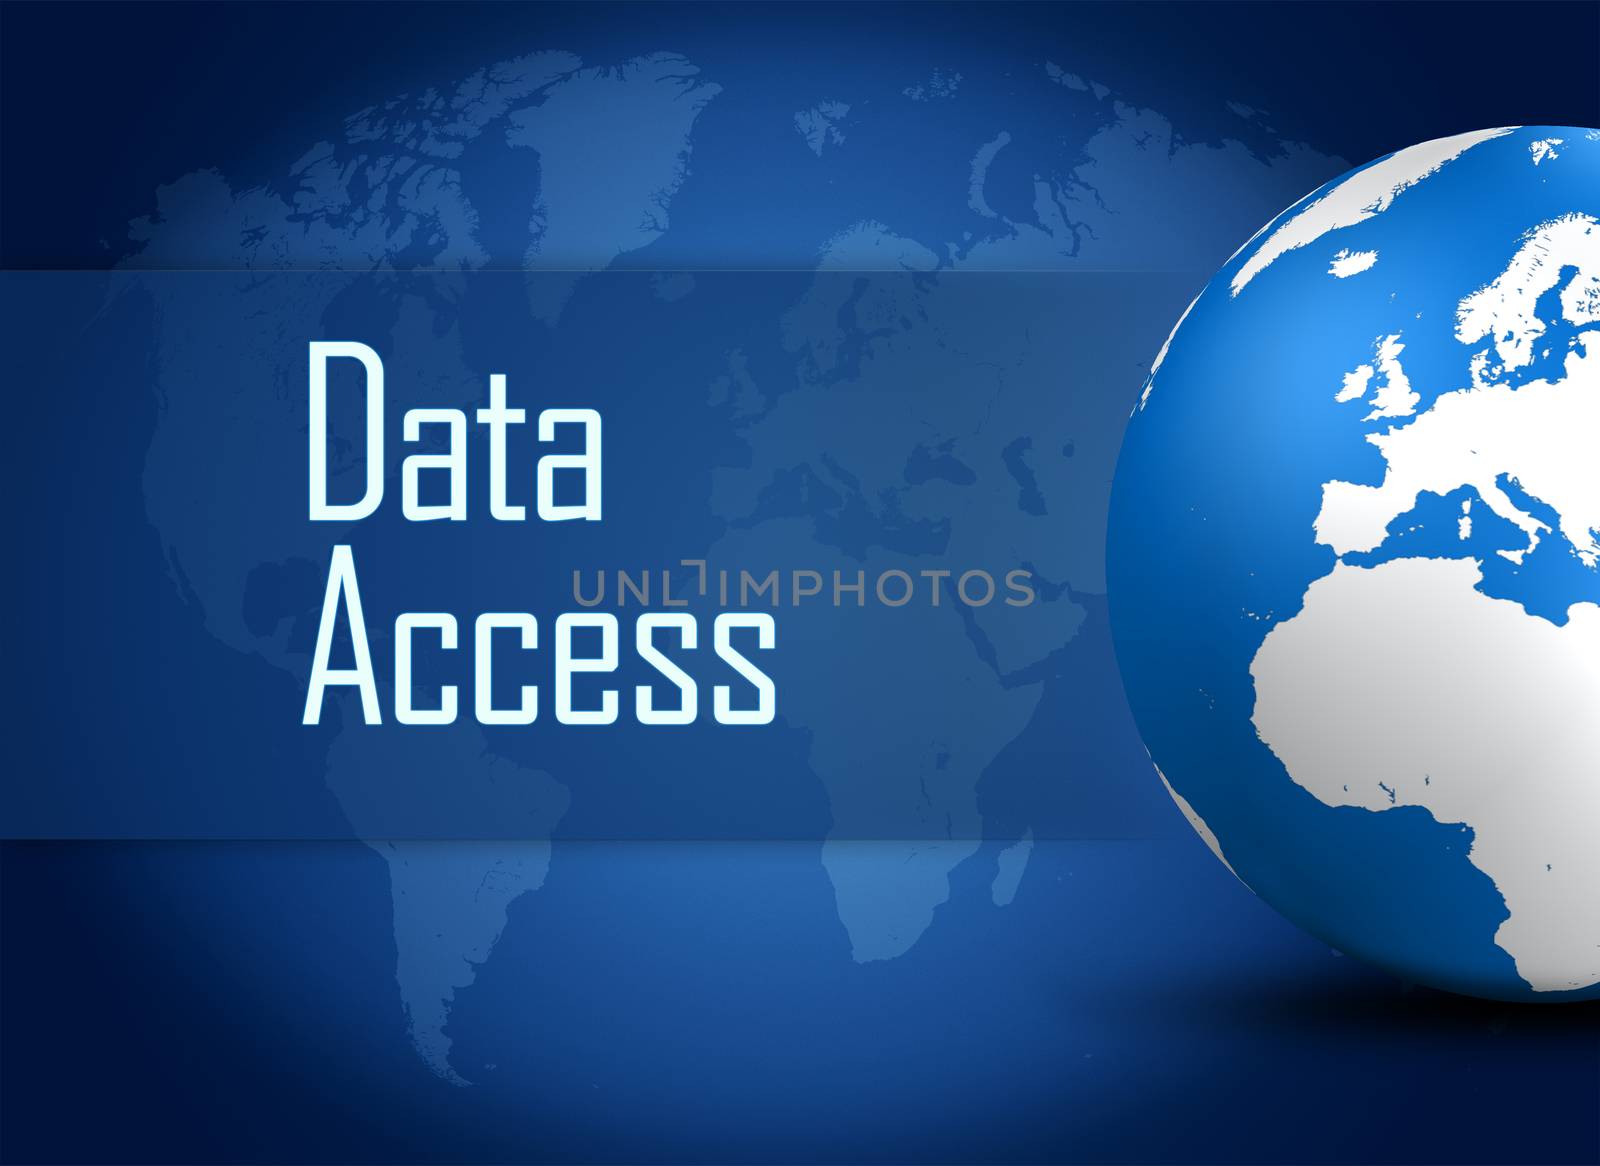 Data Access concept with globe on blue background